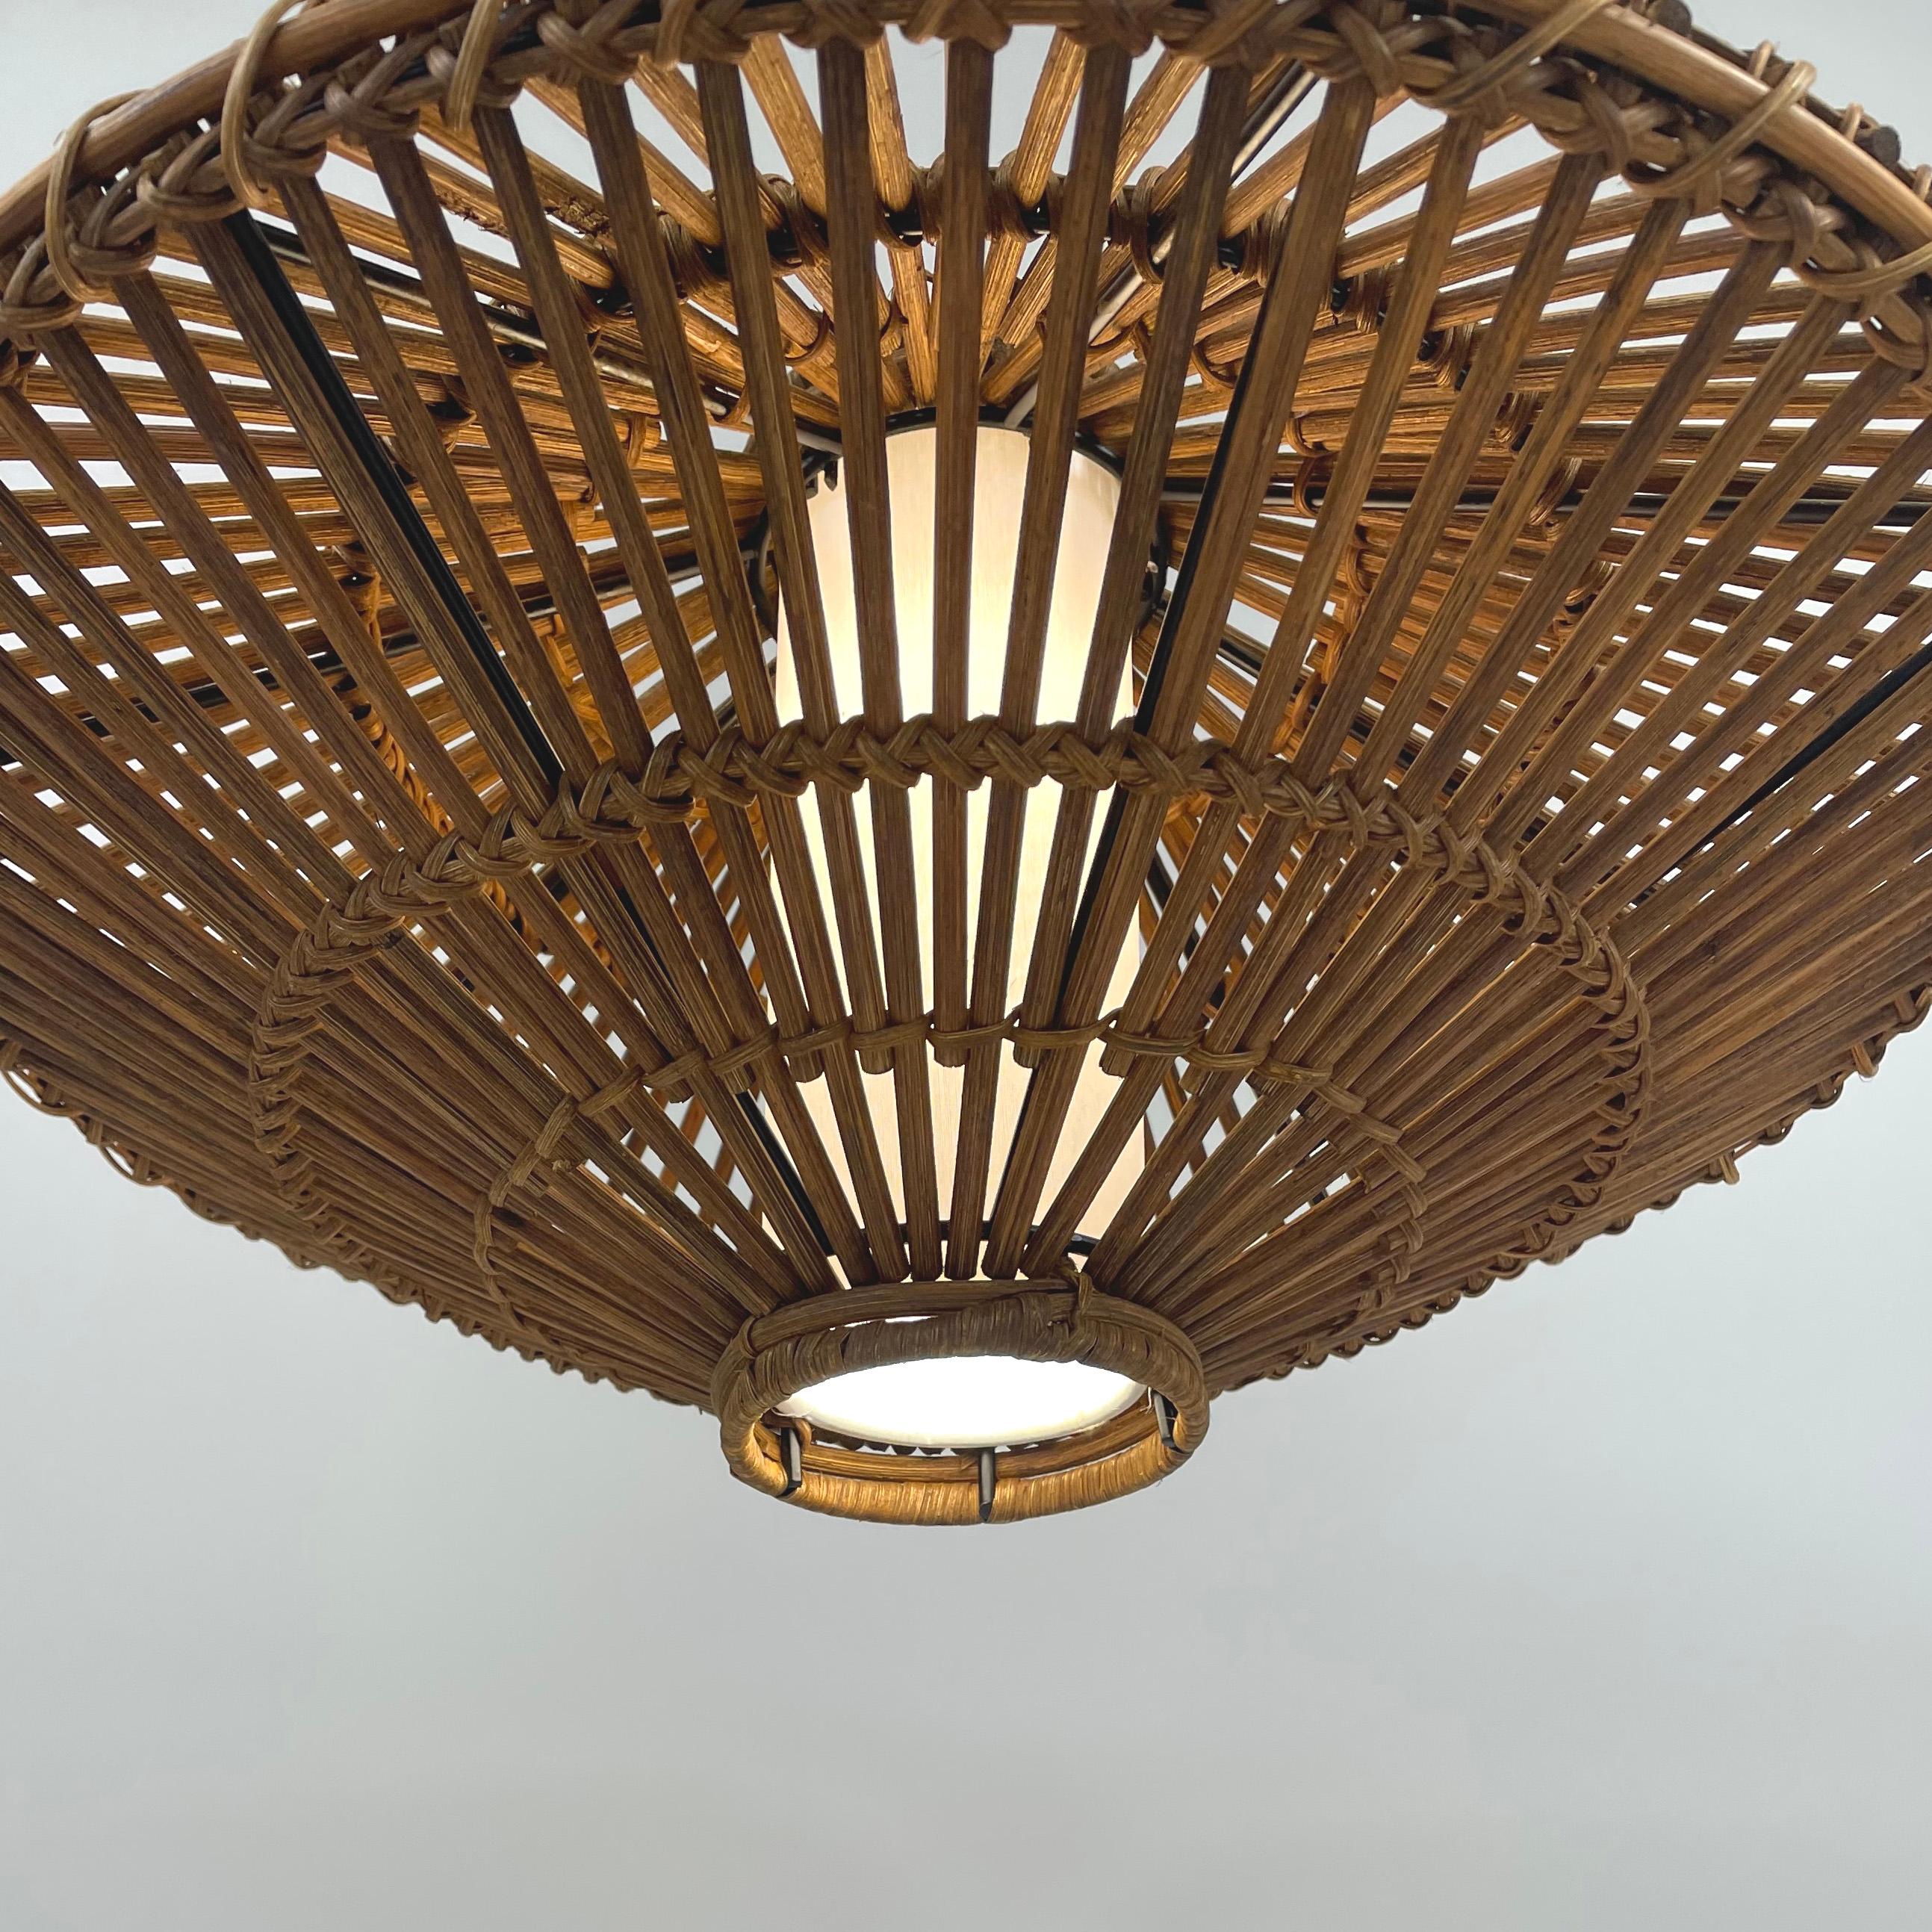 Midcentury French Rattan Wicker Pendant, 1960s For Sale 8